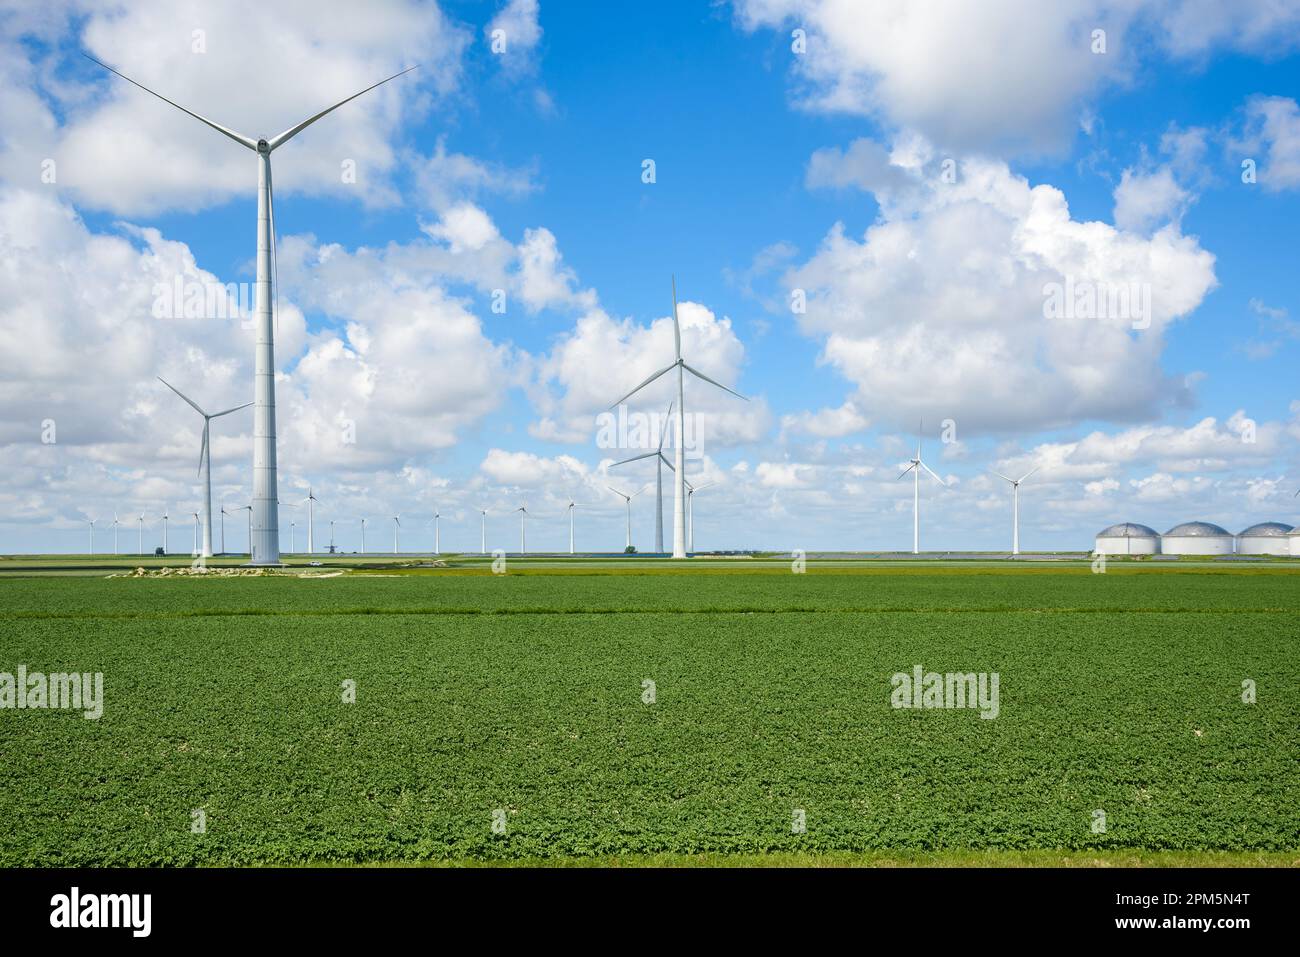 Tall wind turbine in a wind park in the countryside on a sunny summer day Stock Photo